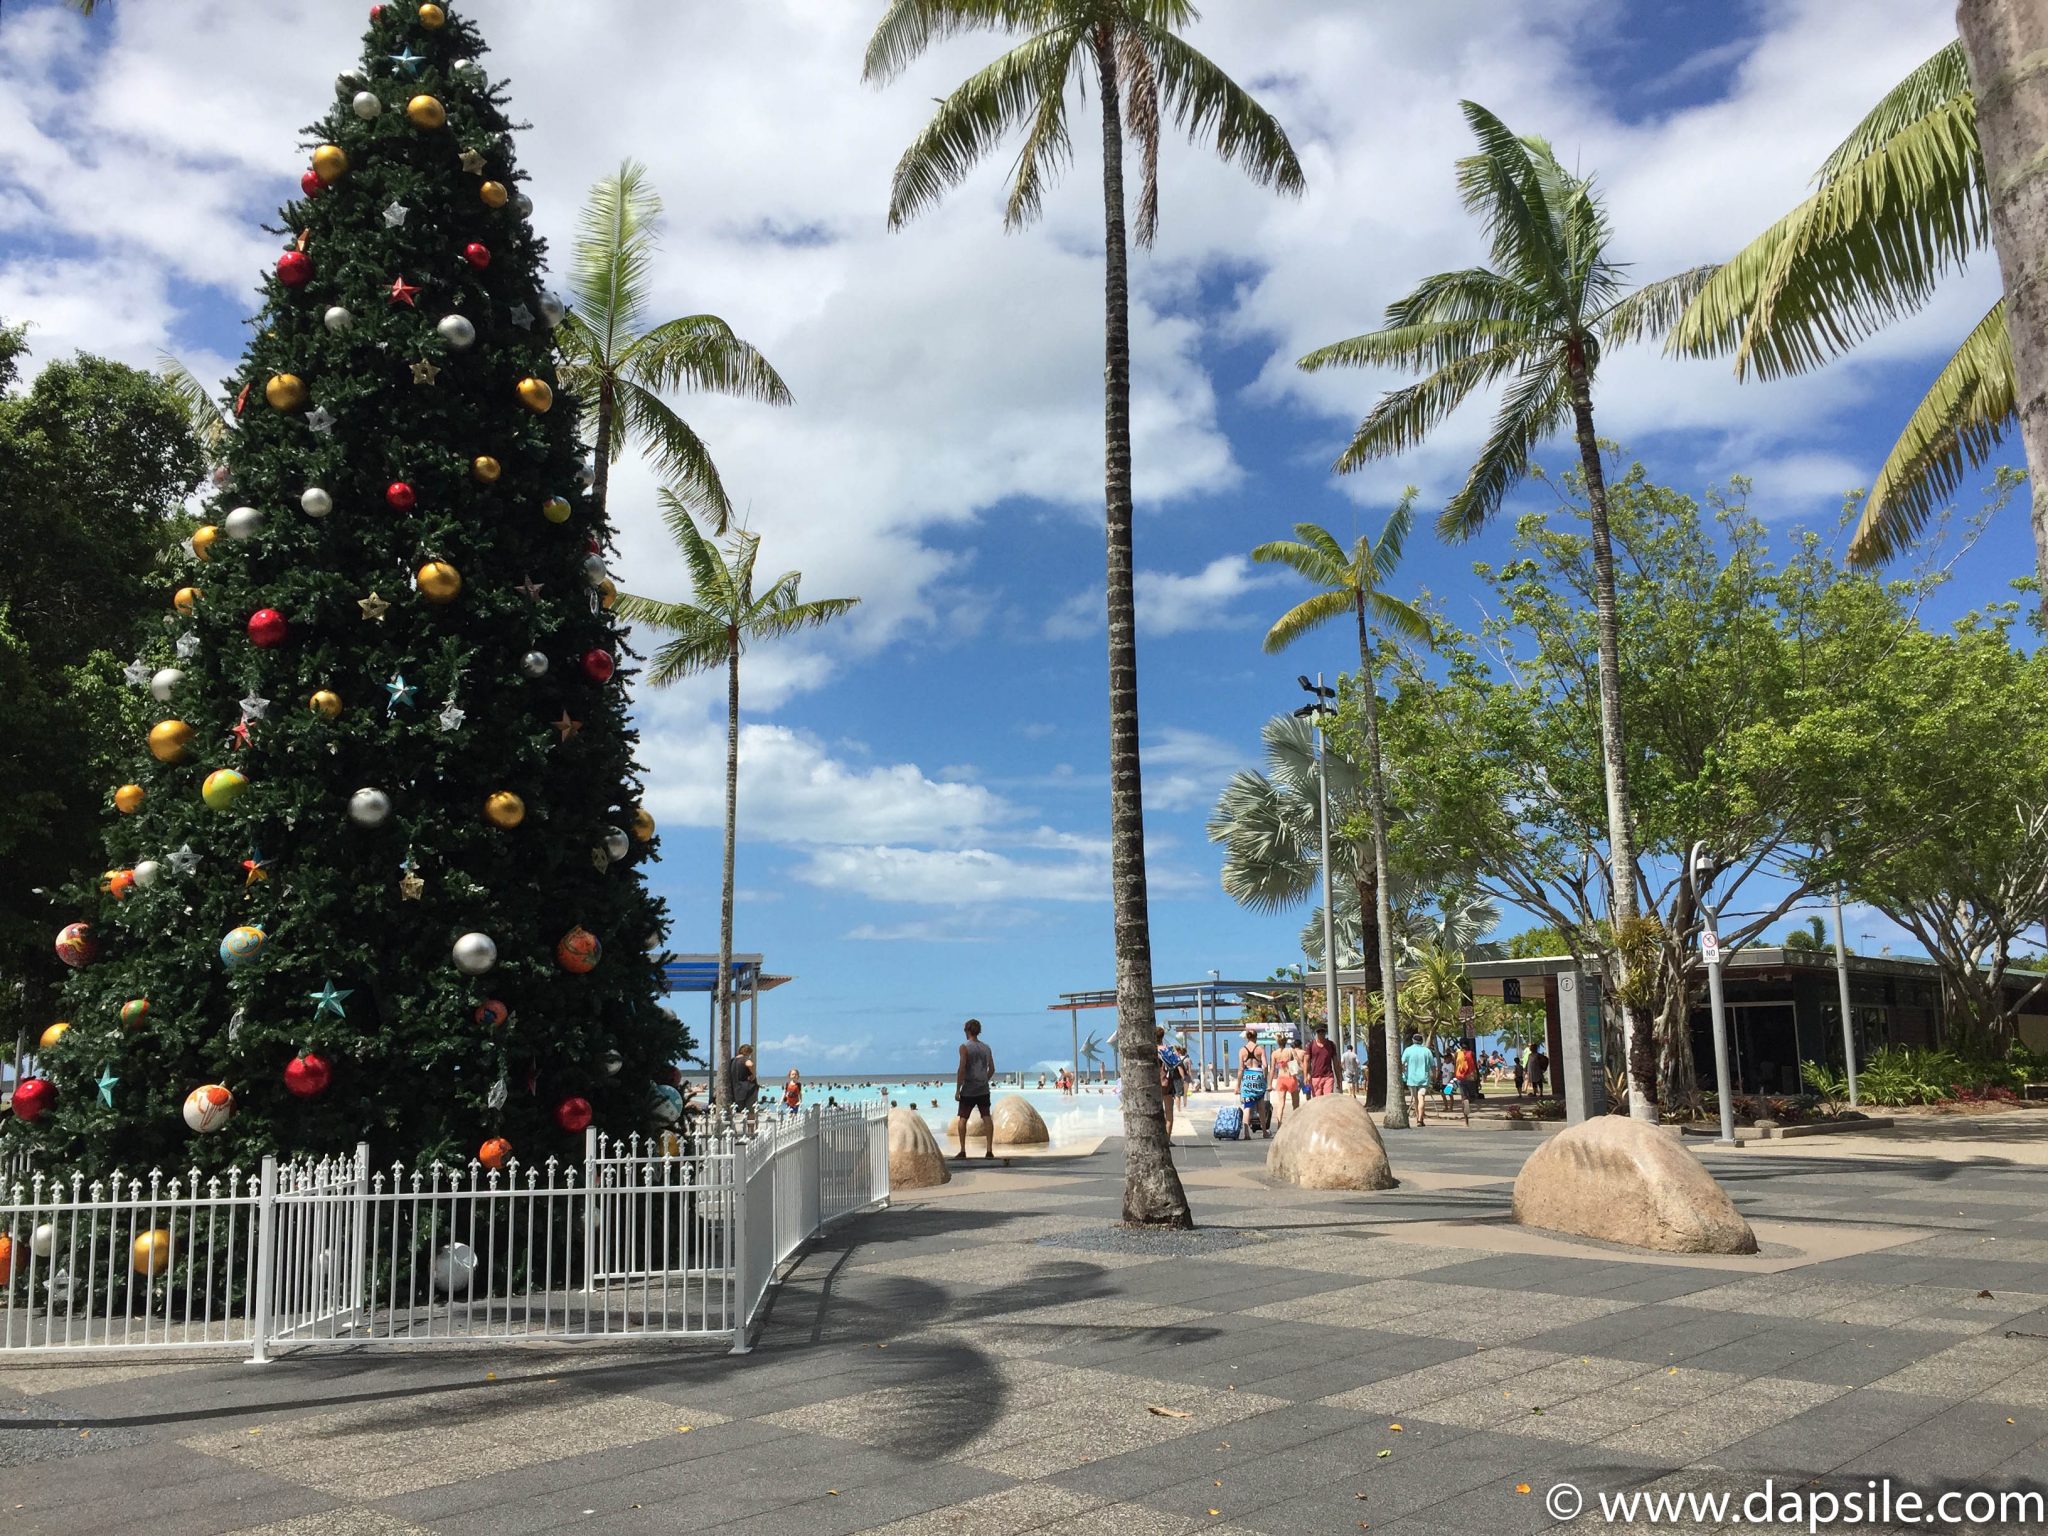 Cairns and the Surrounding Area Christmas Tree and Esplanade